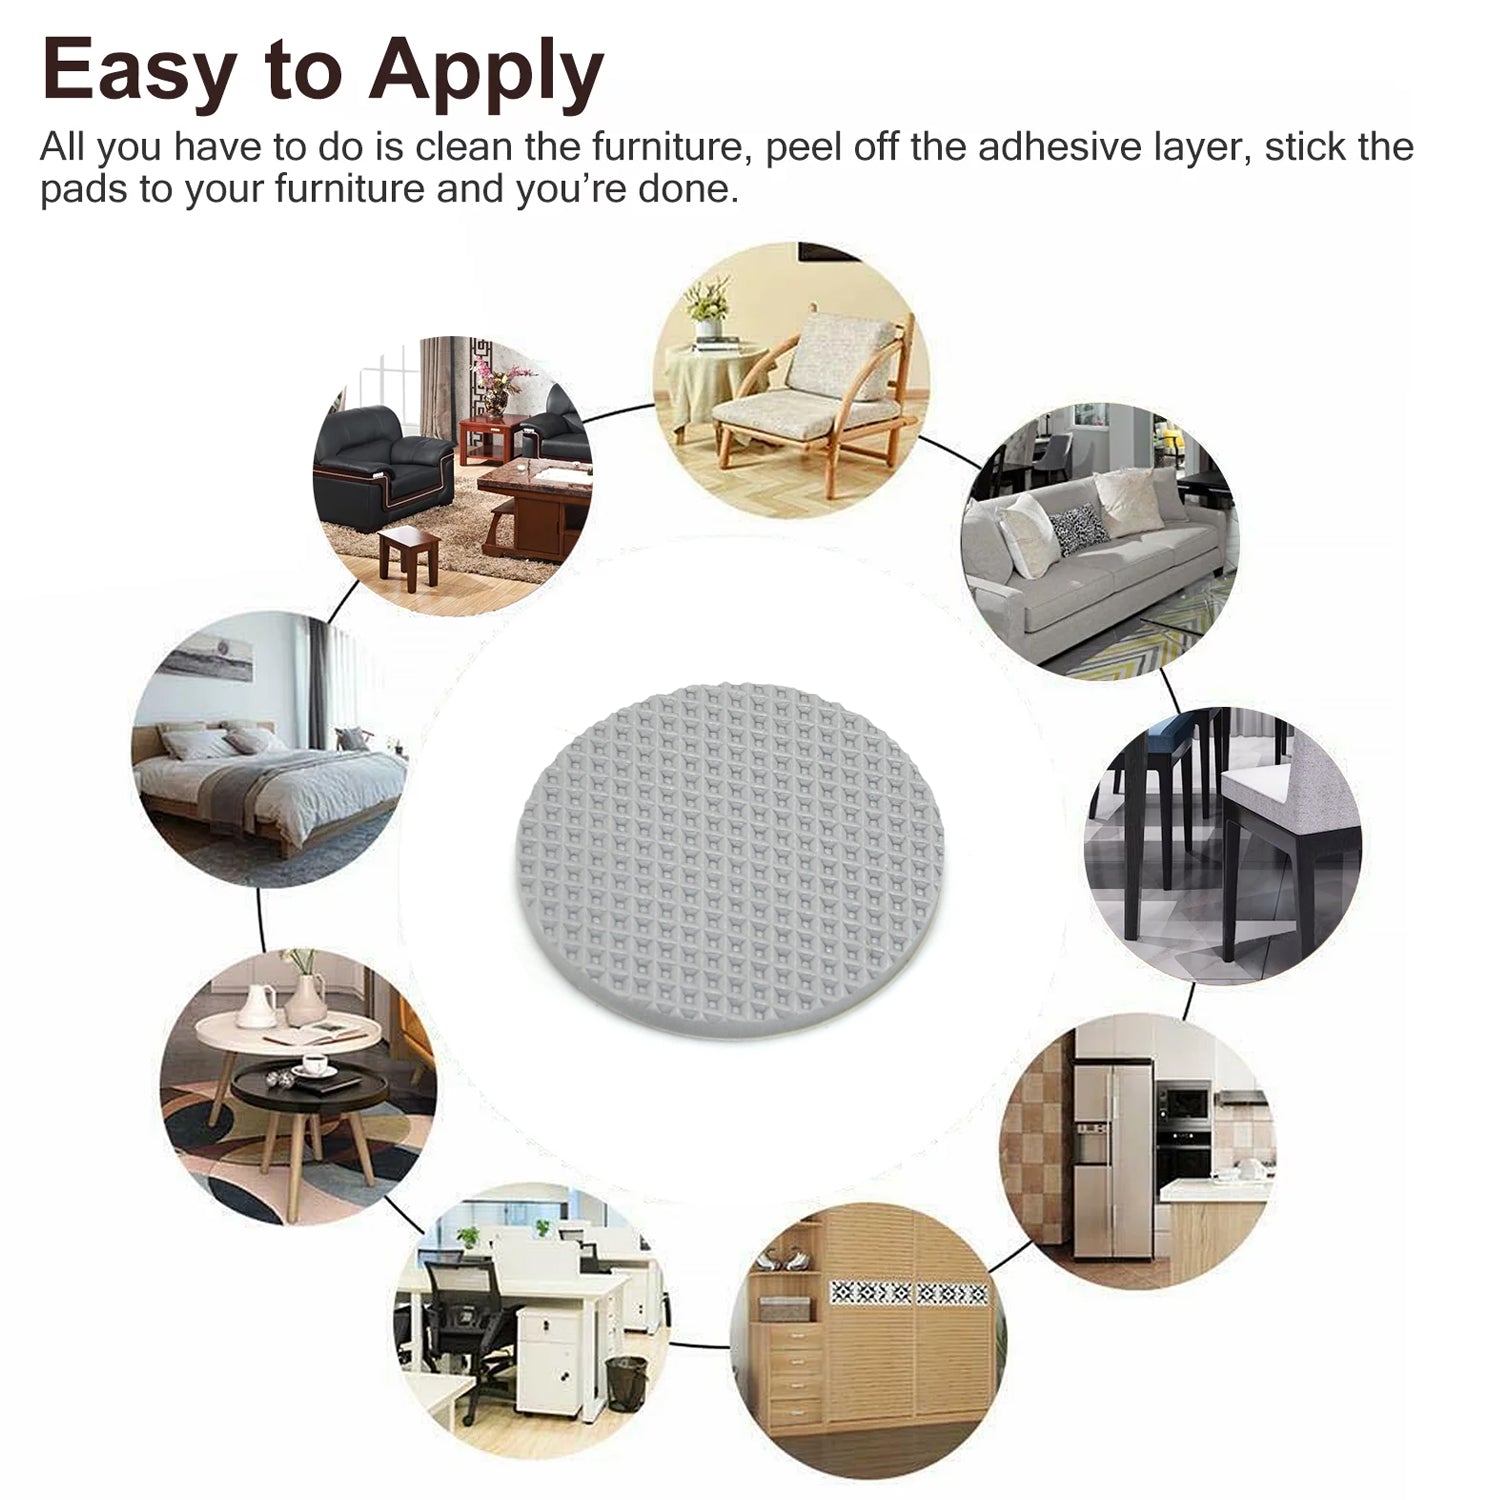 9030A FURNITURE PAD ROUND  FELT PADS FLOOR PROTECTOR PAD FOR HOME & ALL FURNITURE USE DeoDap